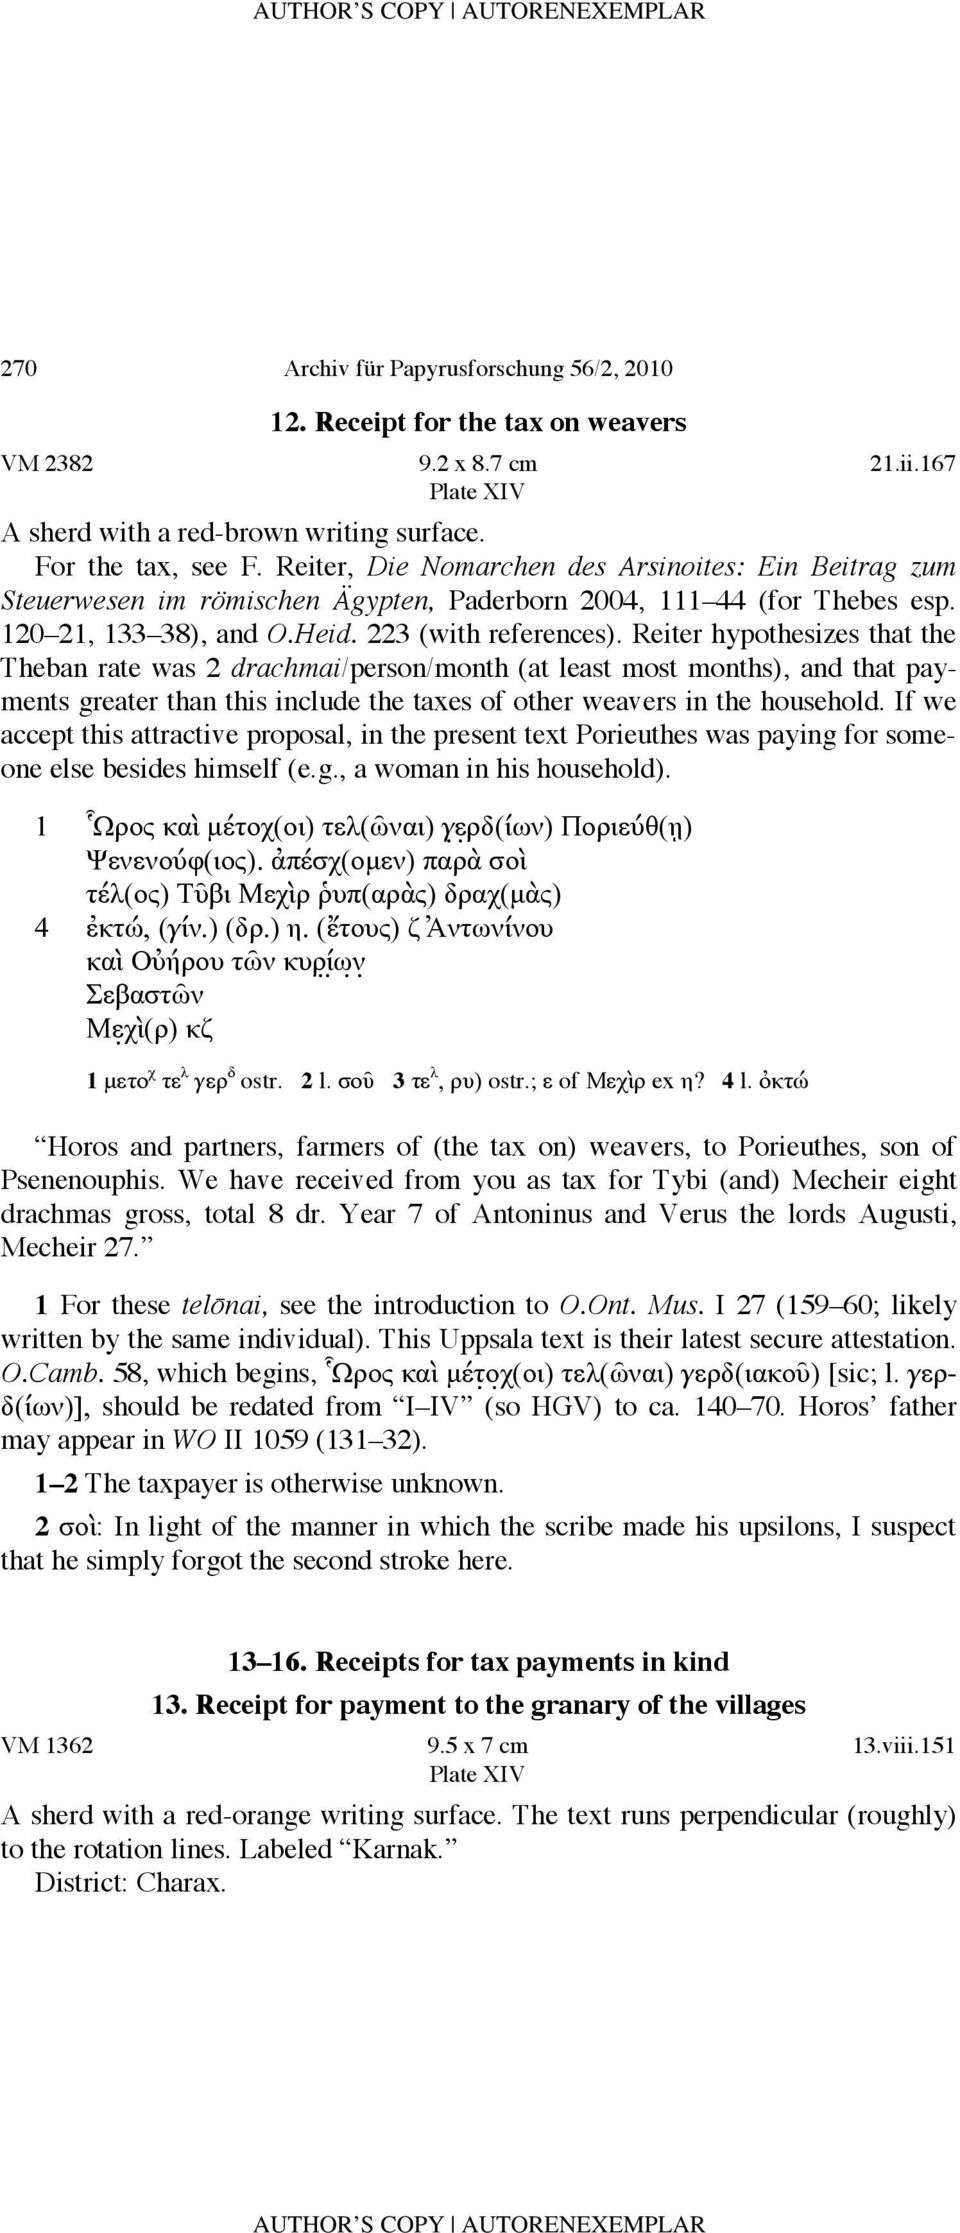 Reiter hypothesizes that the Theban rate was 2 drachmai/person/month (at least most months), and that payments greater than this include the taxes of other weavers in the household.